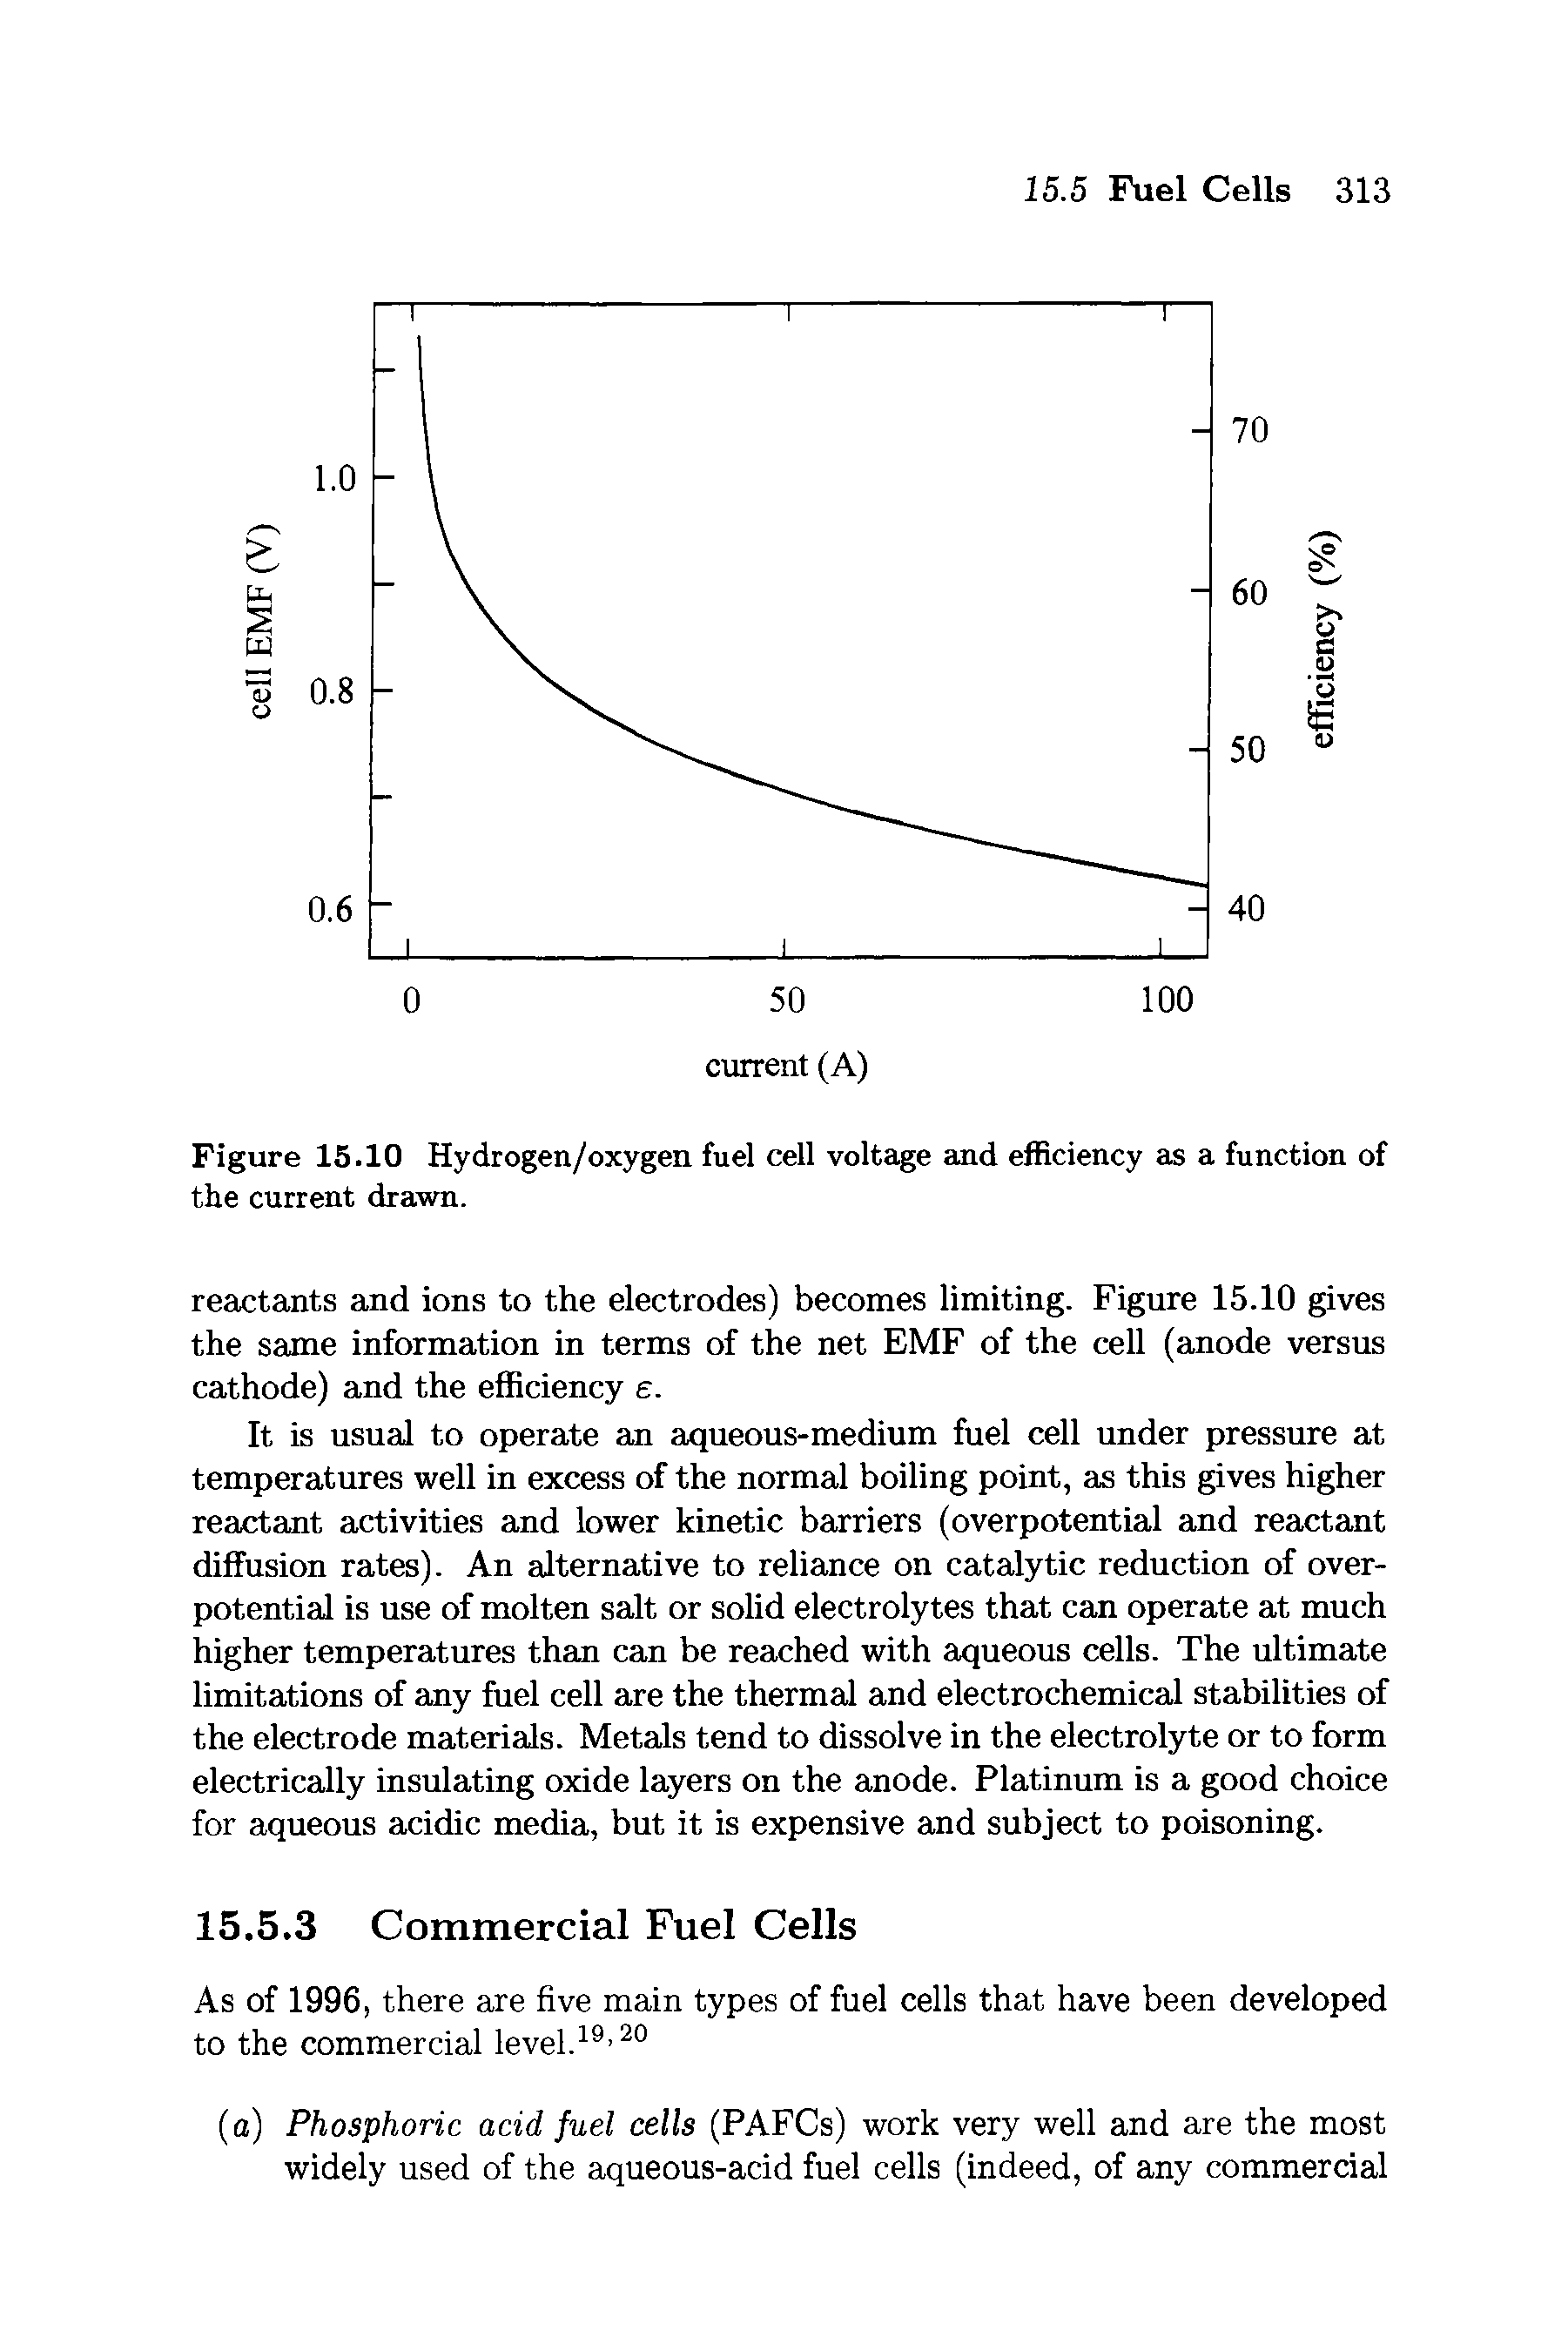 Figure 15.10 Hydrogen/oxygen fuel cell voltage and efficiency as a function of the current drawn.